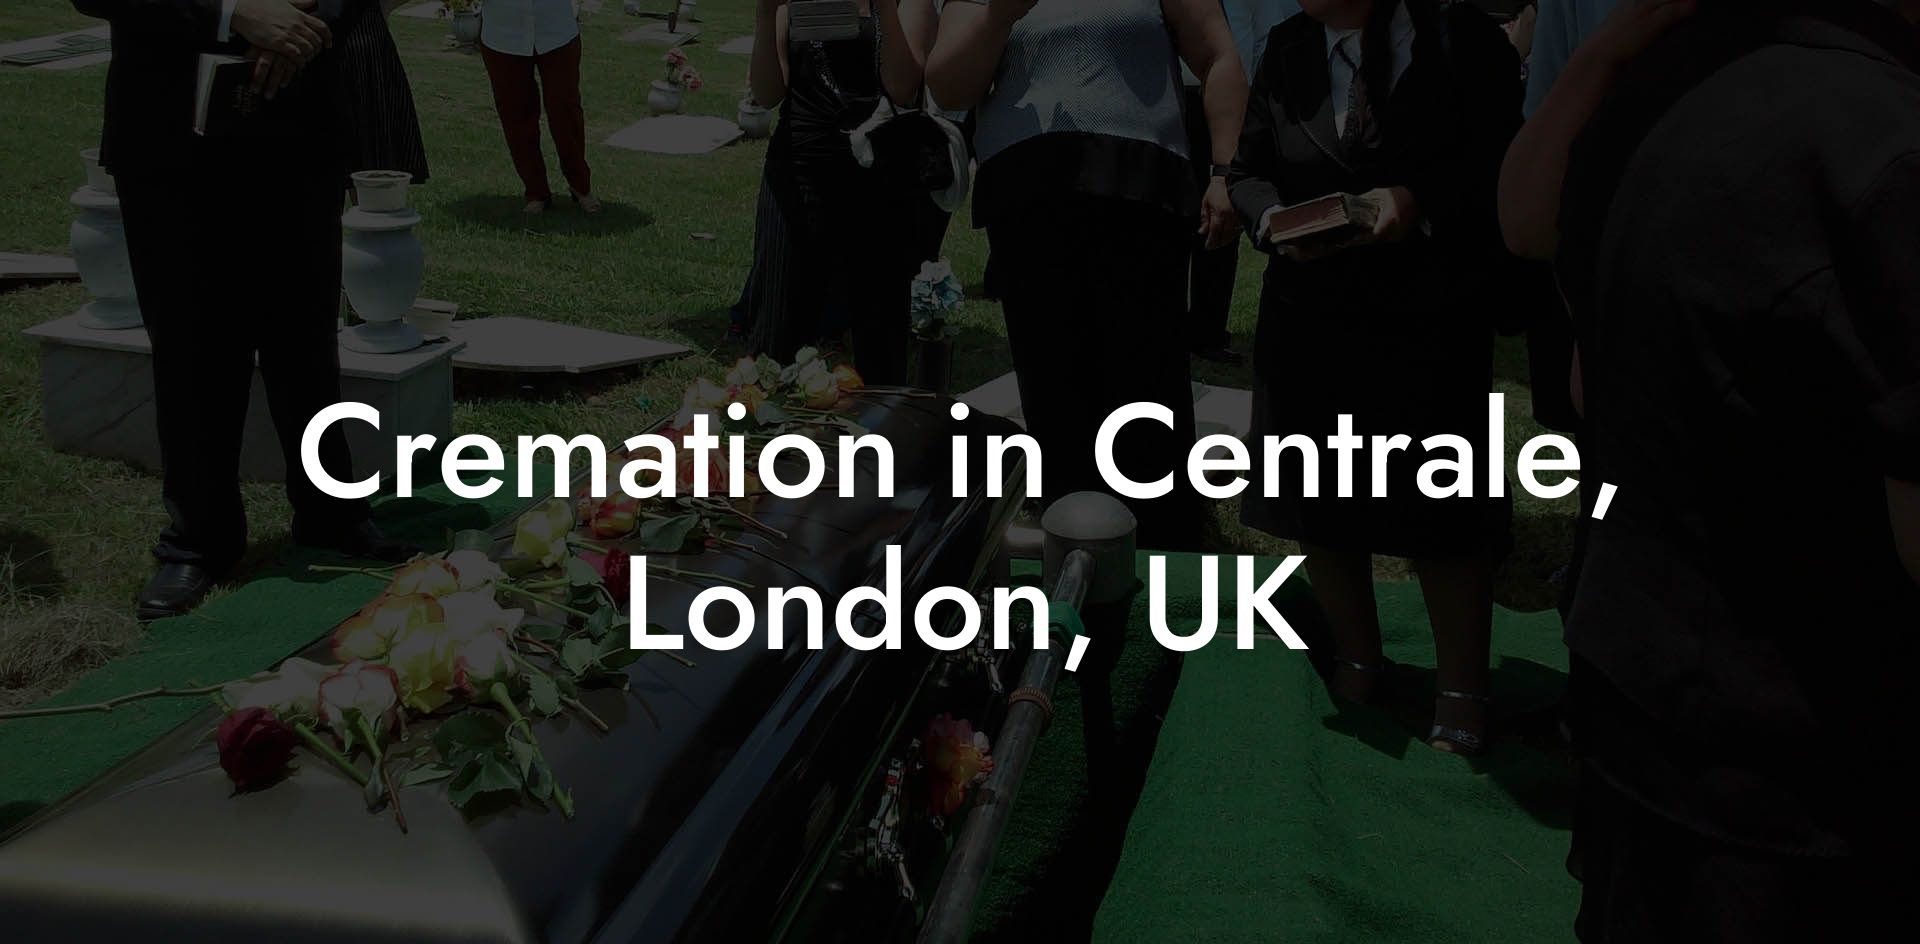 Cremation in Centrale, London, UK